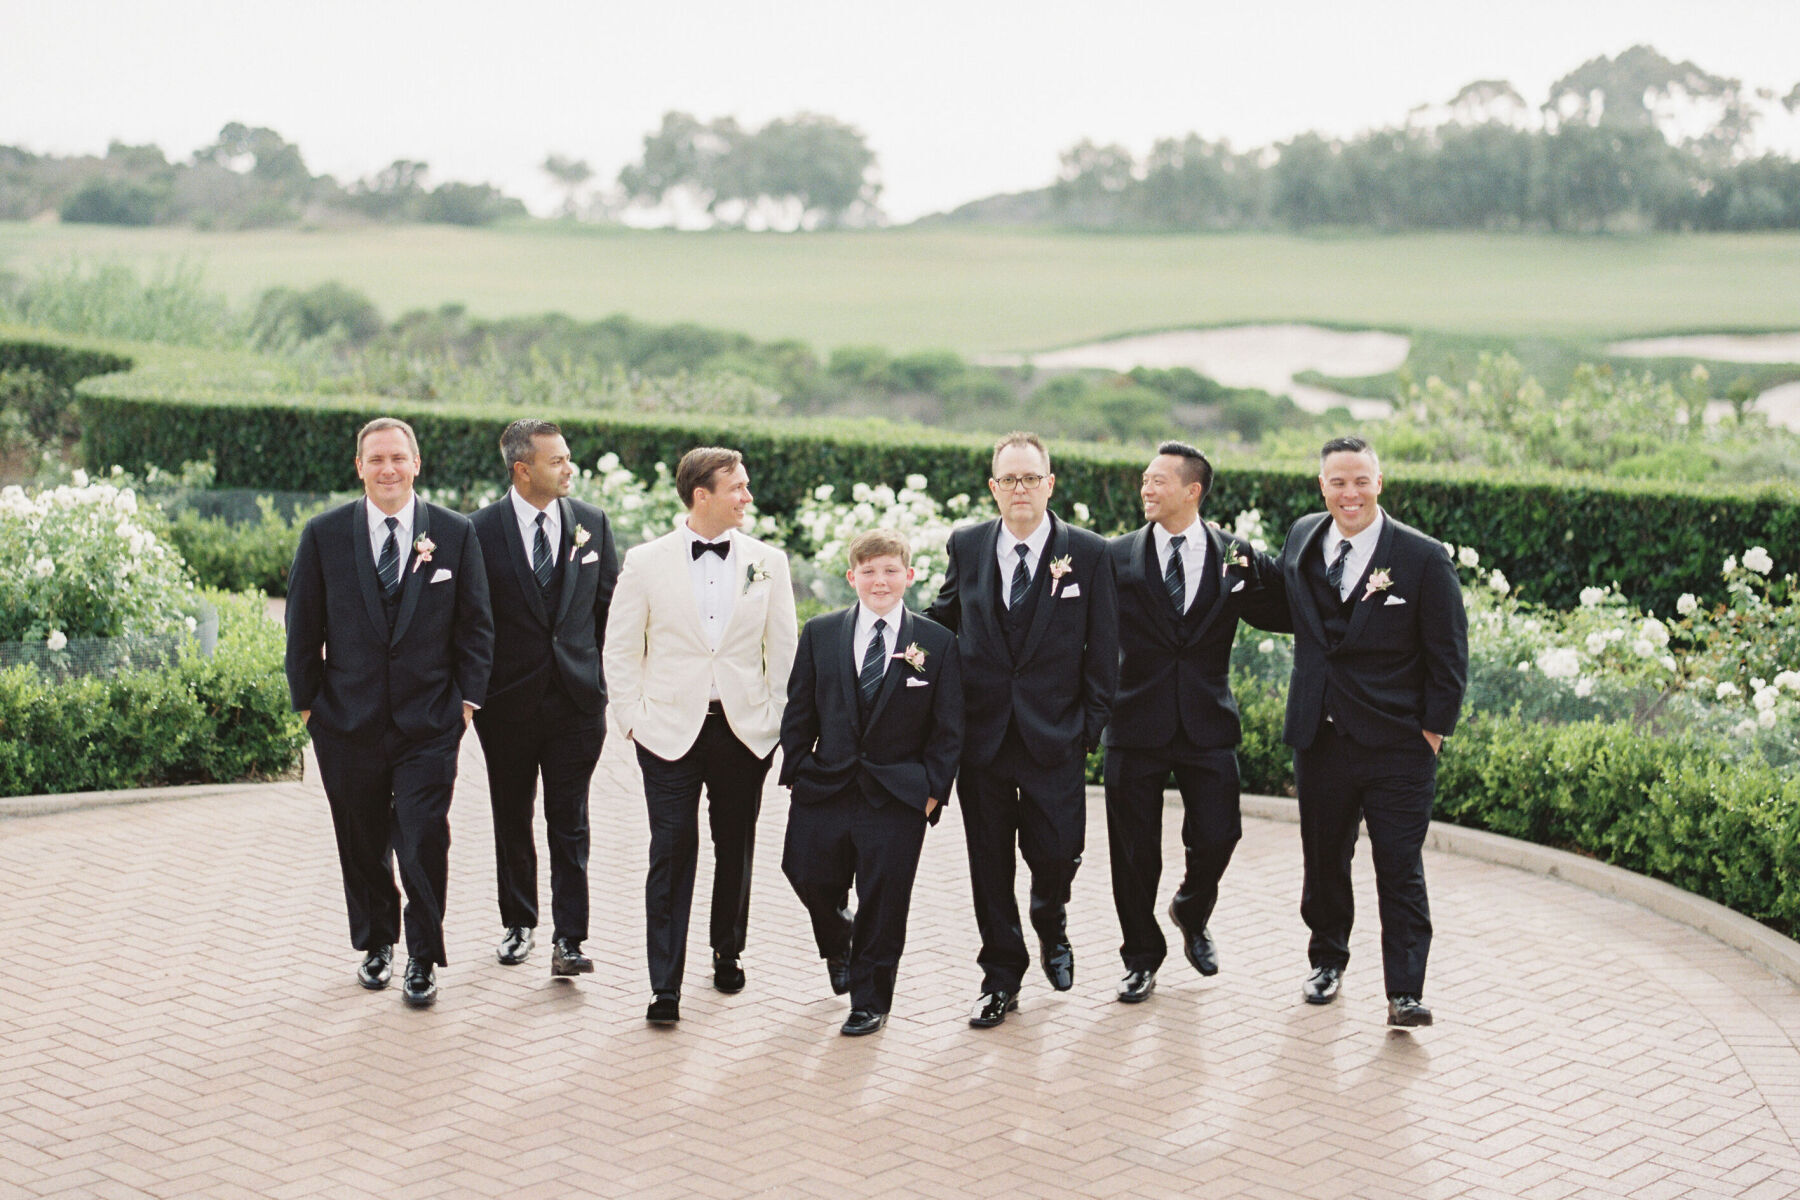 Golf Course Wedding Venues: A groom posing with his wedding party.